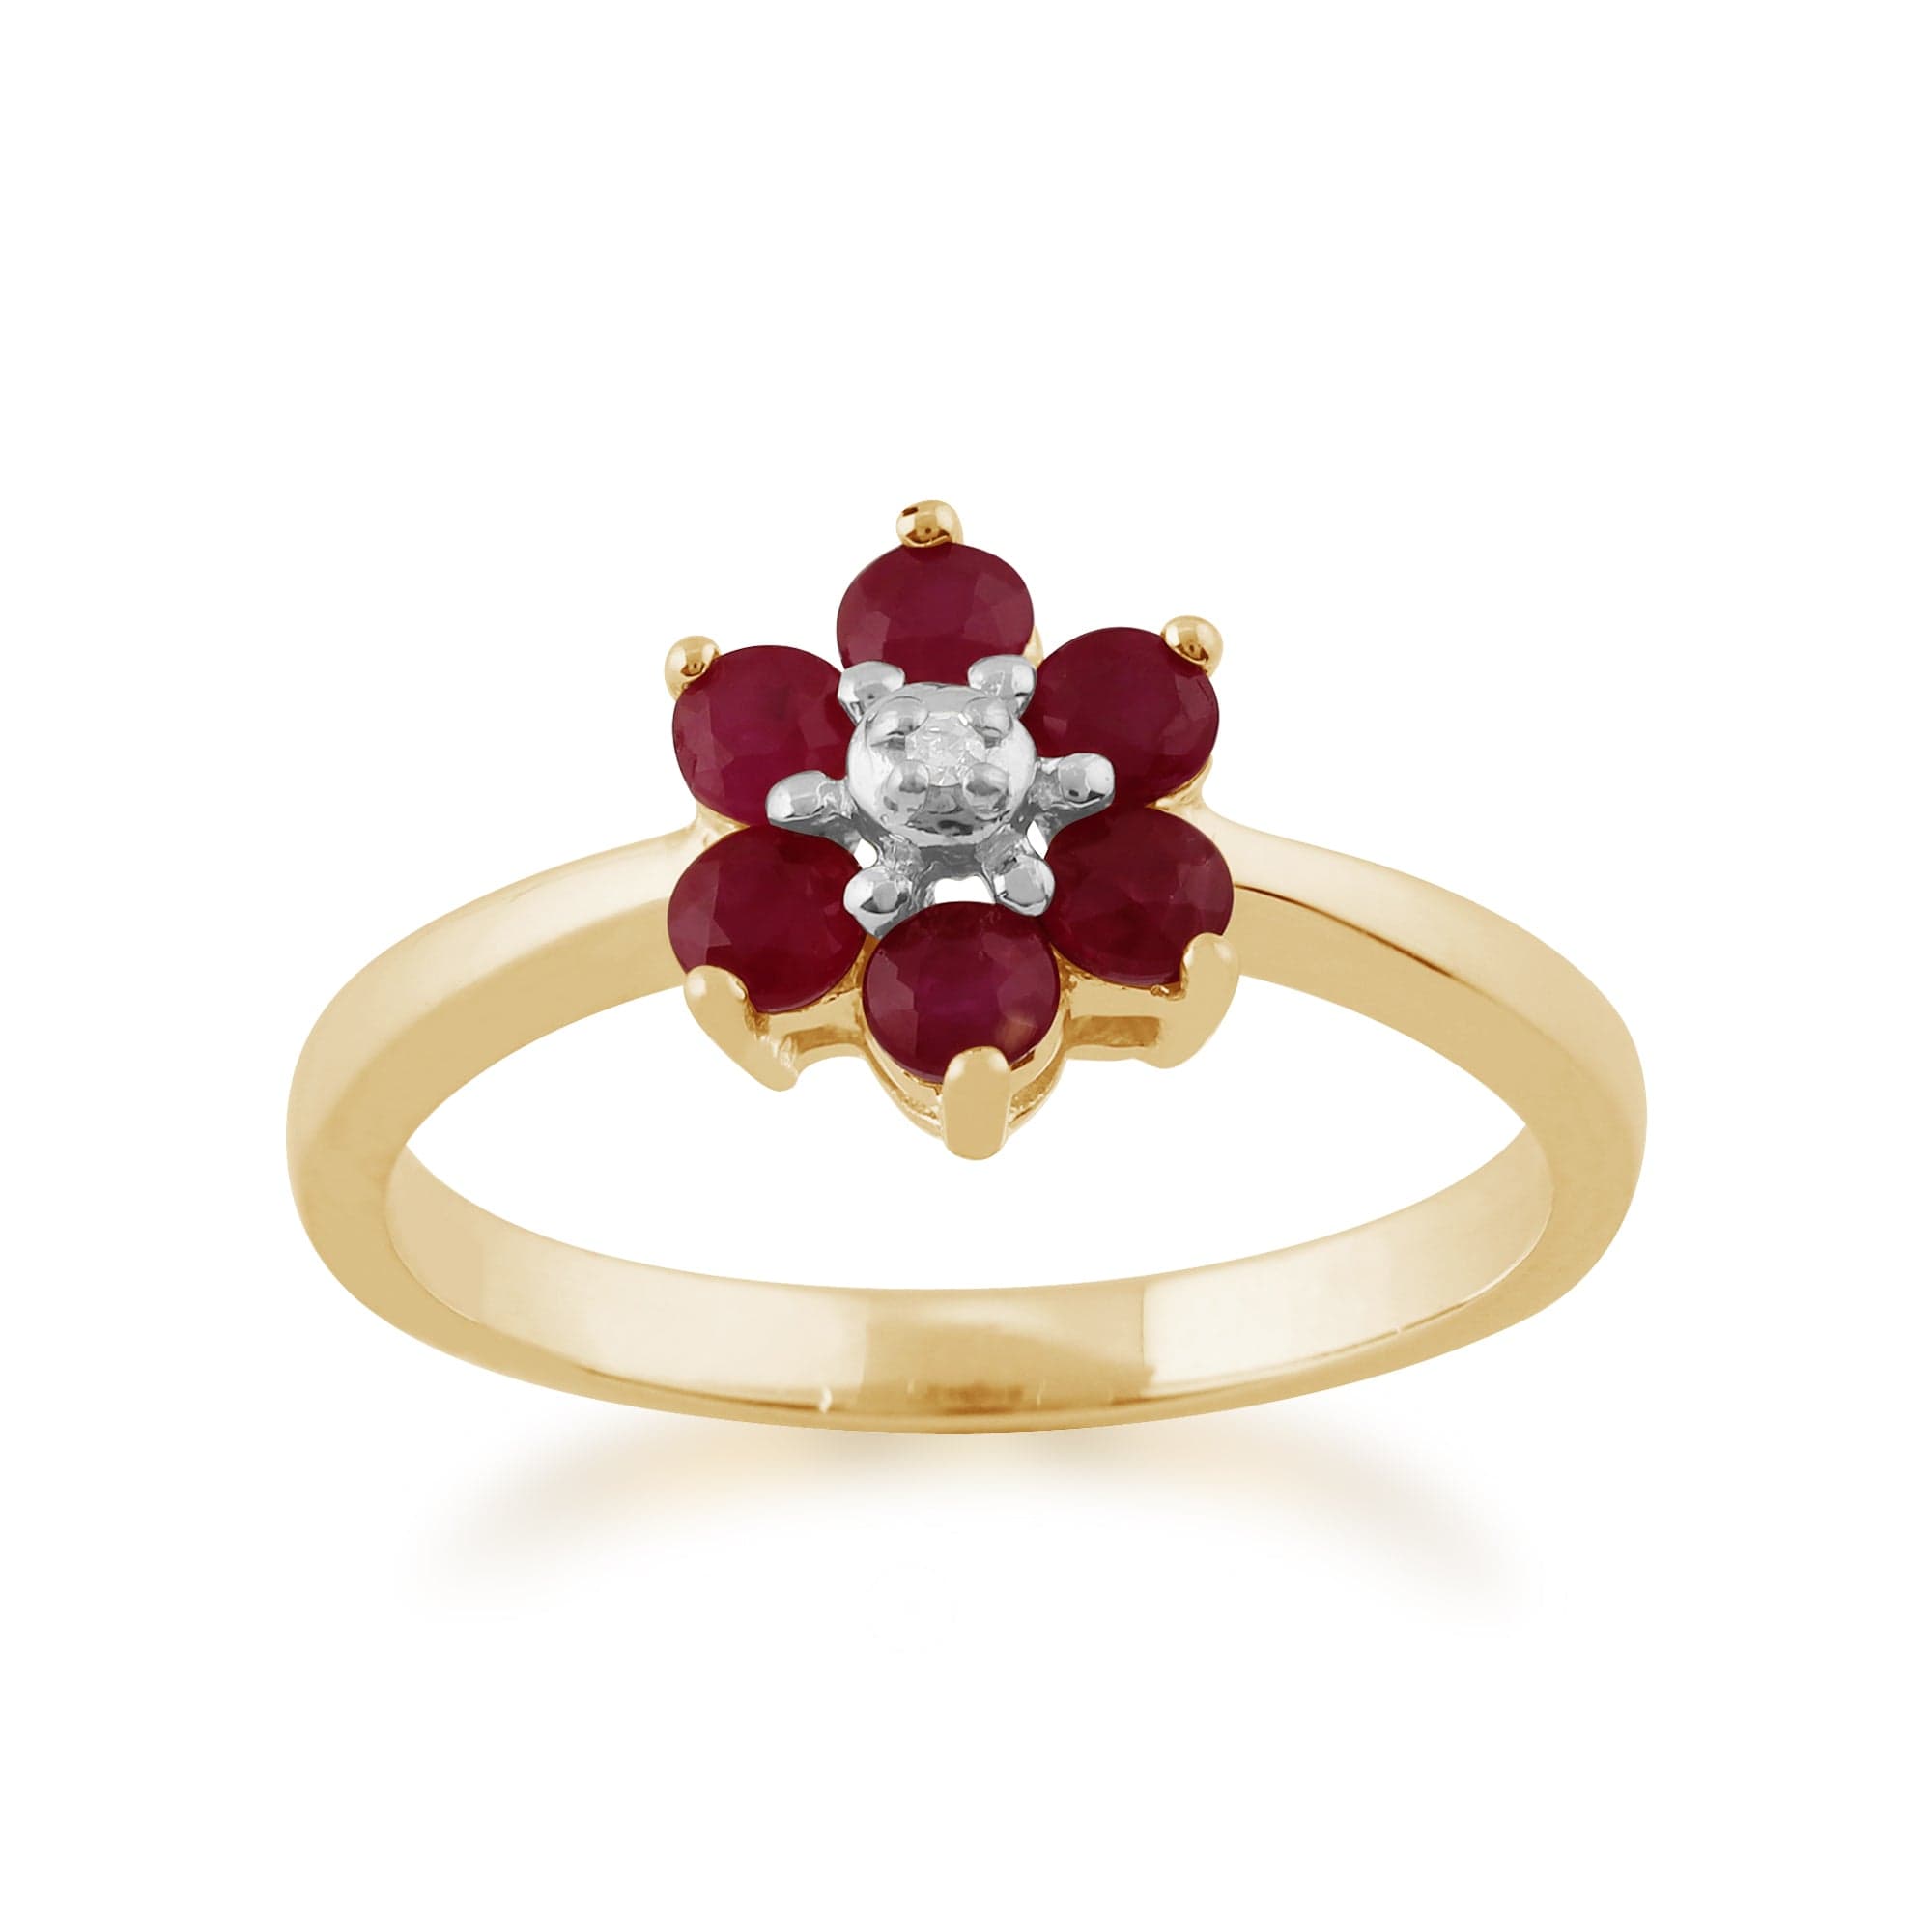 Floral Round Ruby & Diamond Cluster Ring in 9ct Yellow Gold - Gemondo